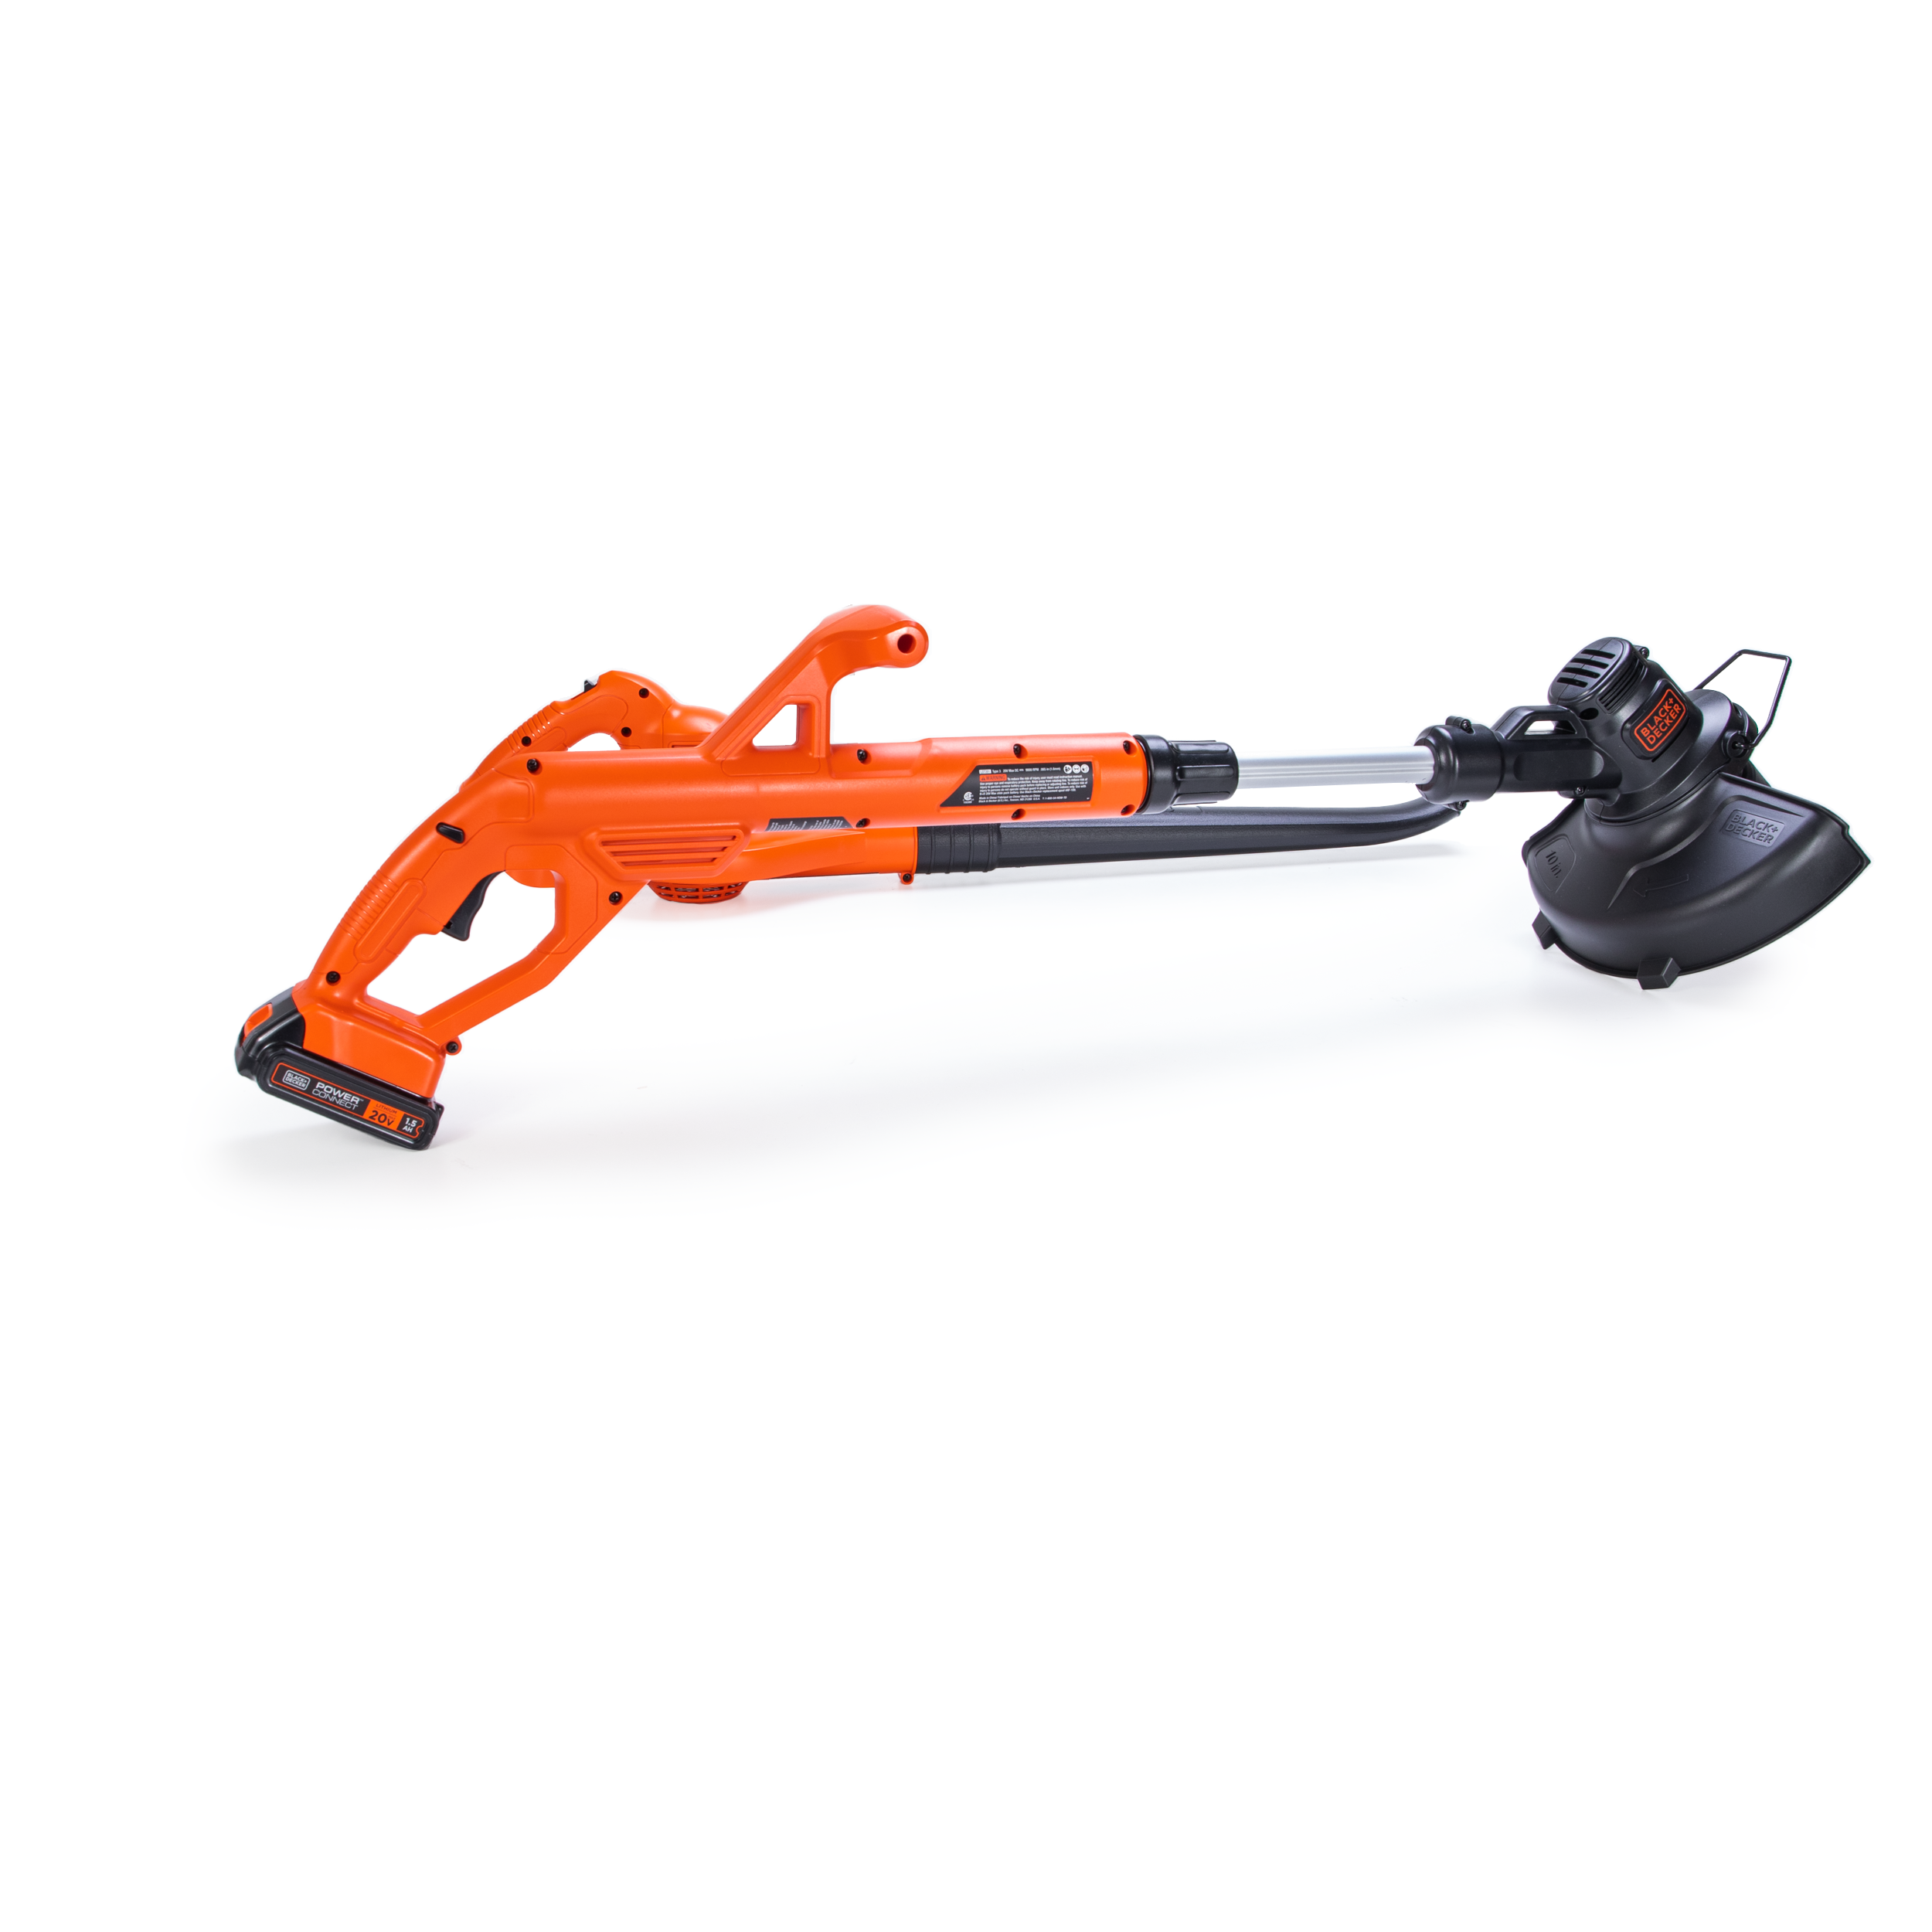 BLACK+DECKER LSW221 20V MAX* Cordless Lithium-Ion Sweeper Kit, 1.5